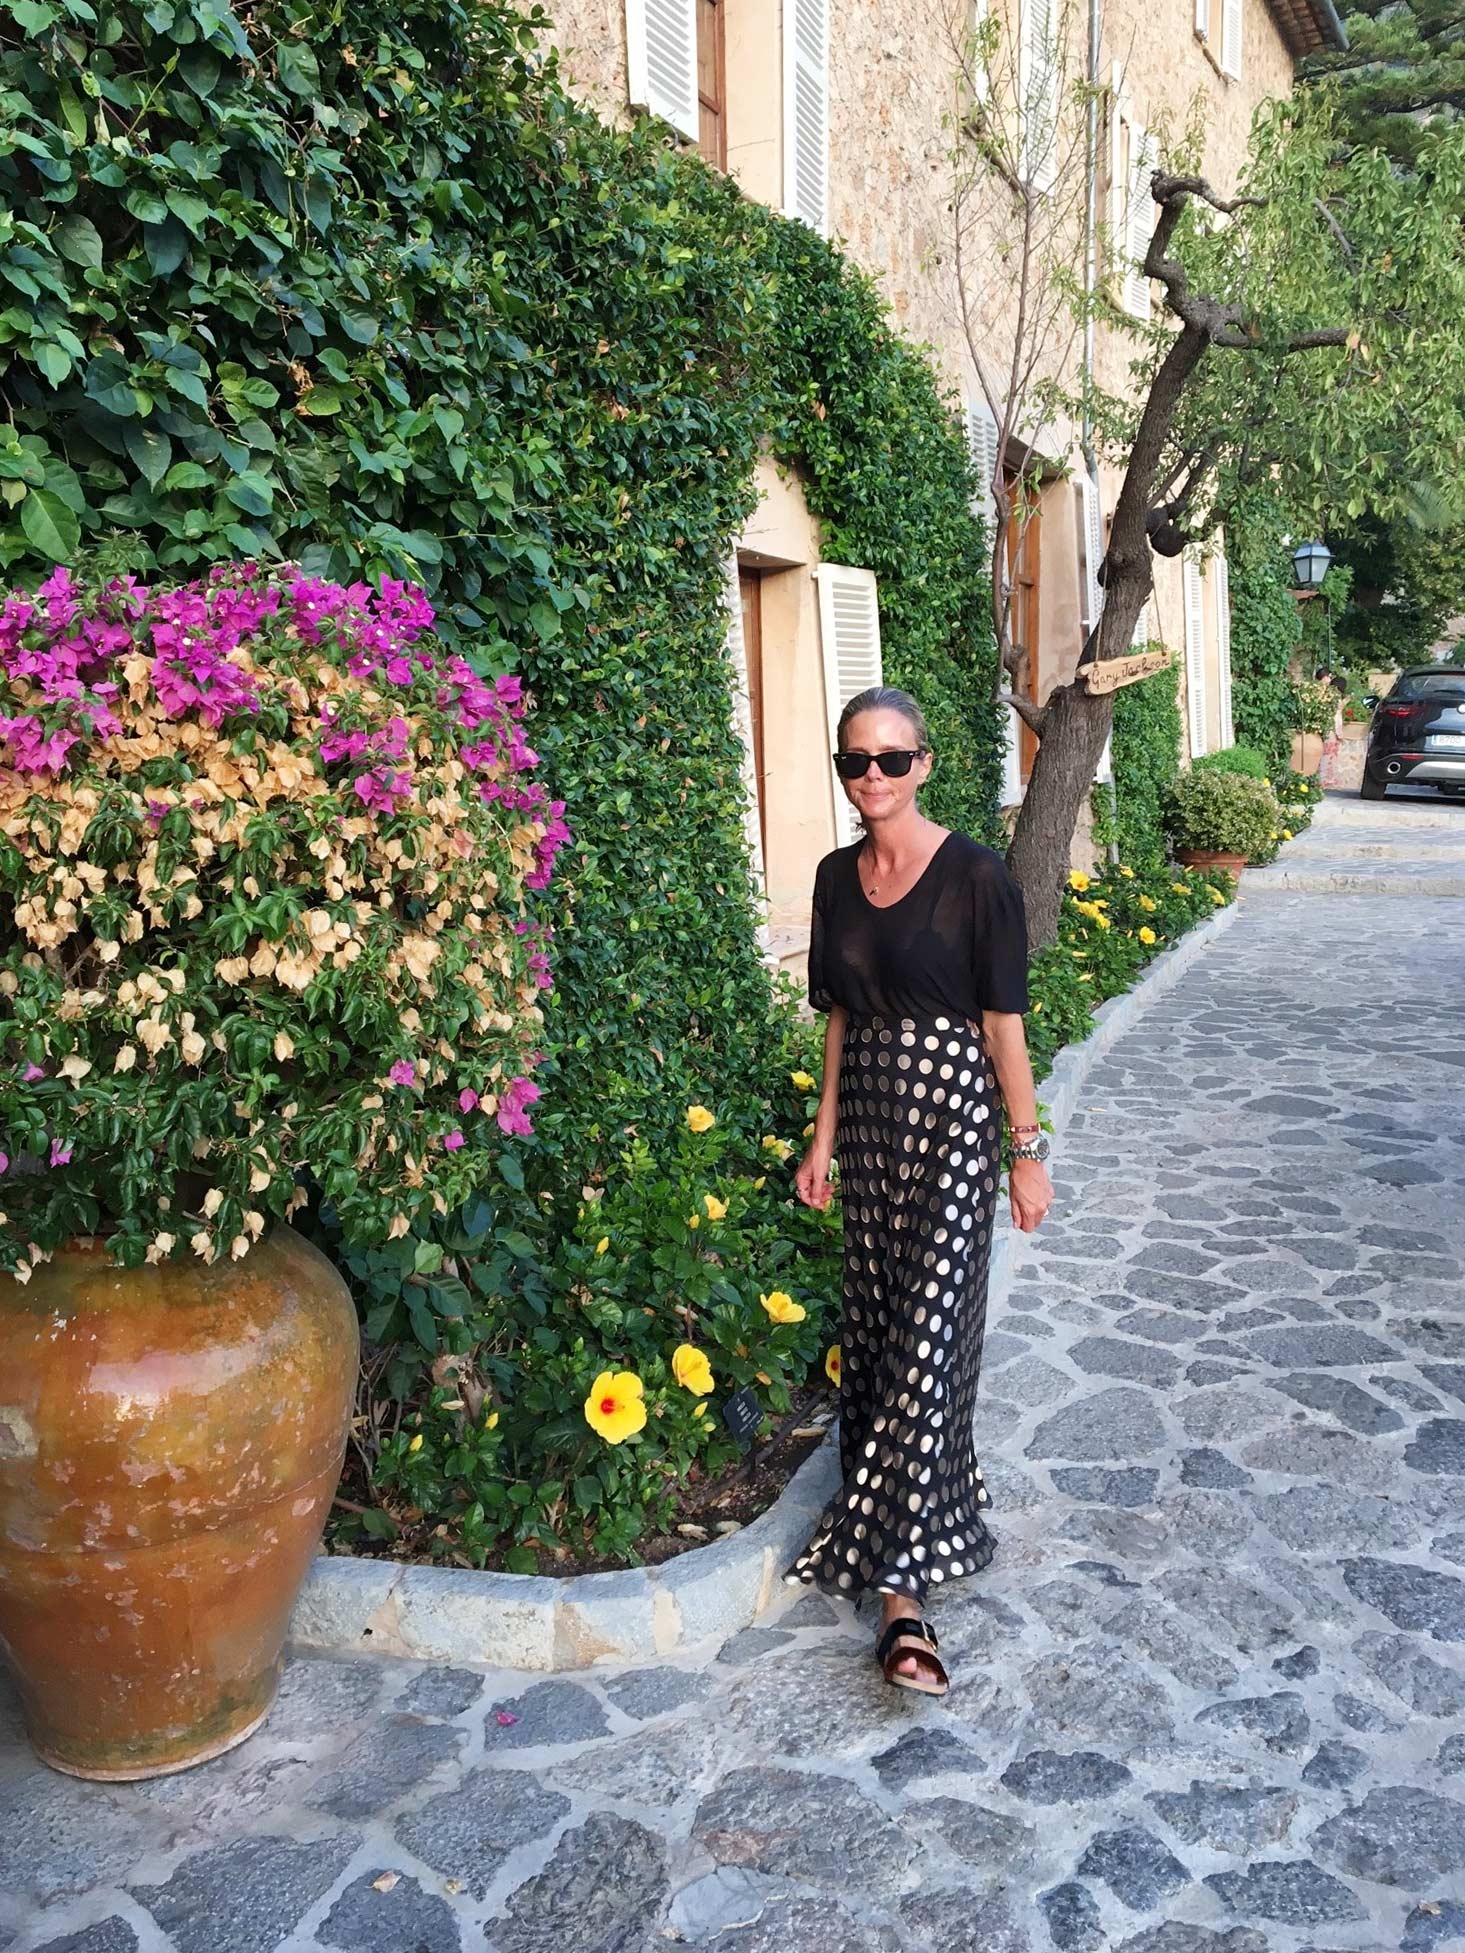 Sophie Lee strolls past lush green vines, blooming flowers and old buildings on her way to dinner 